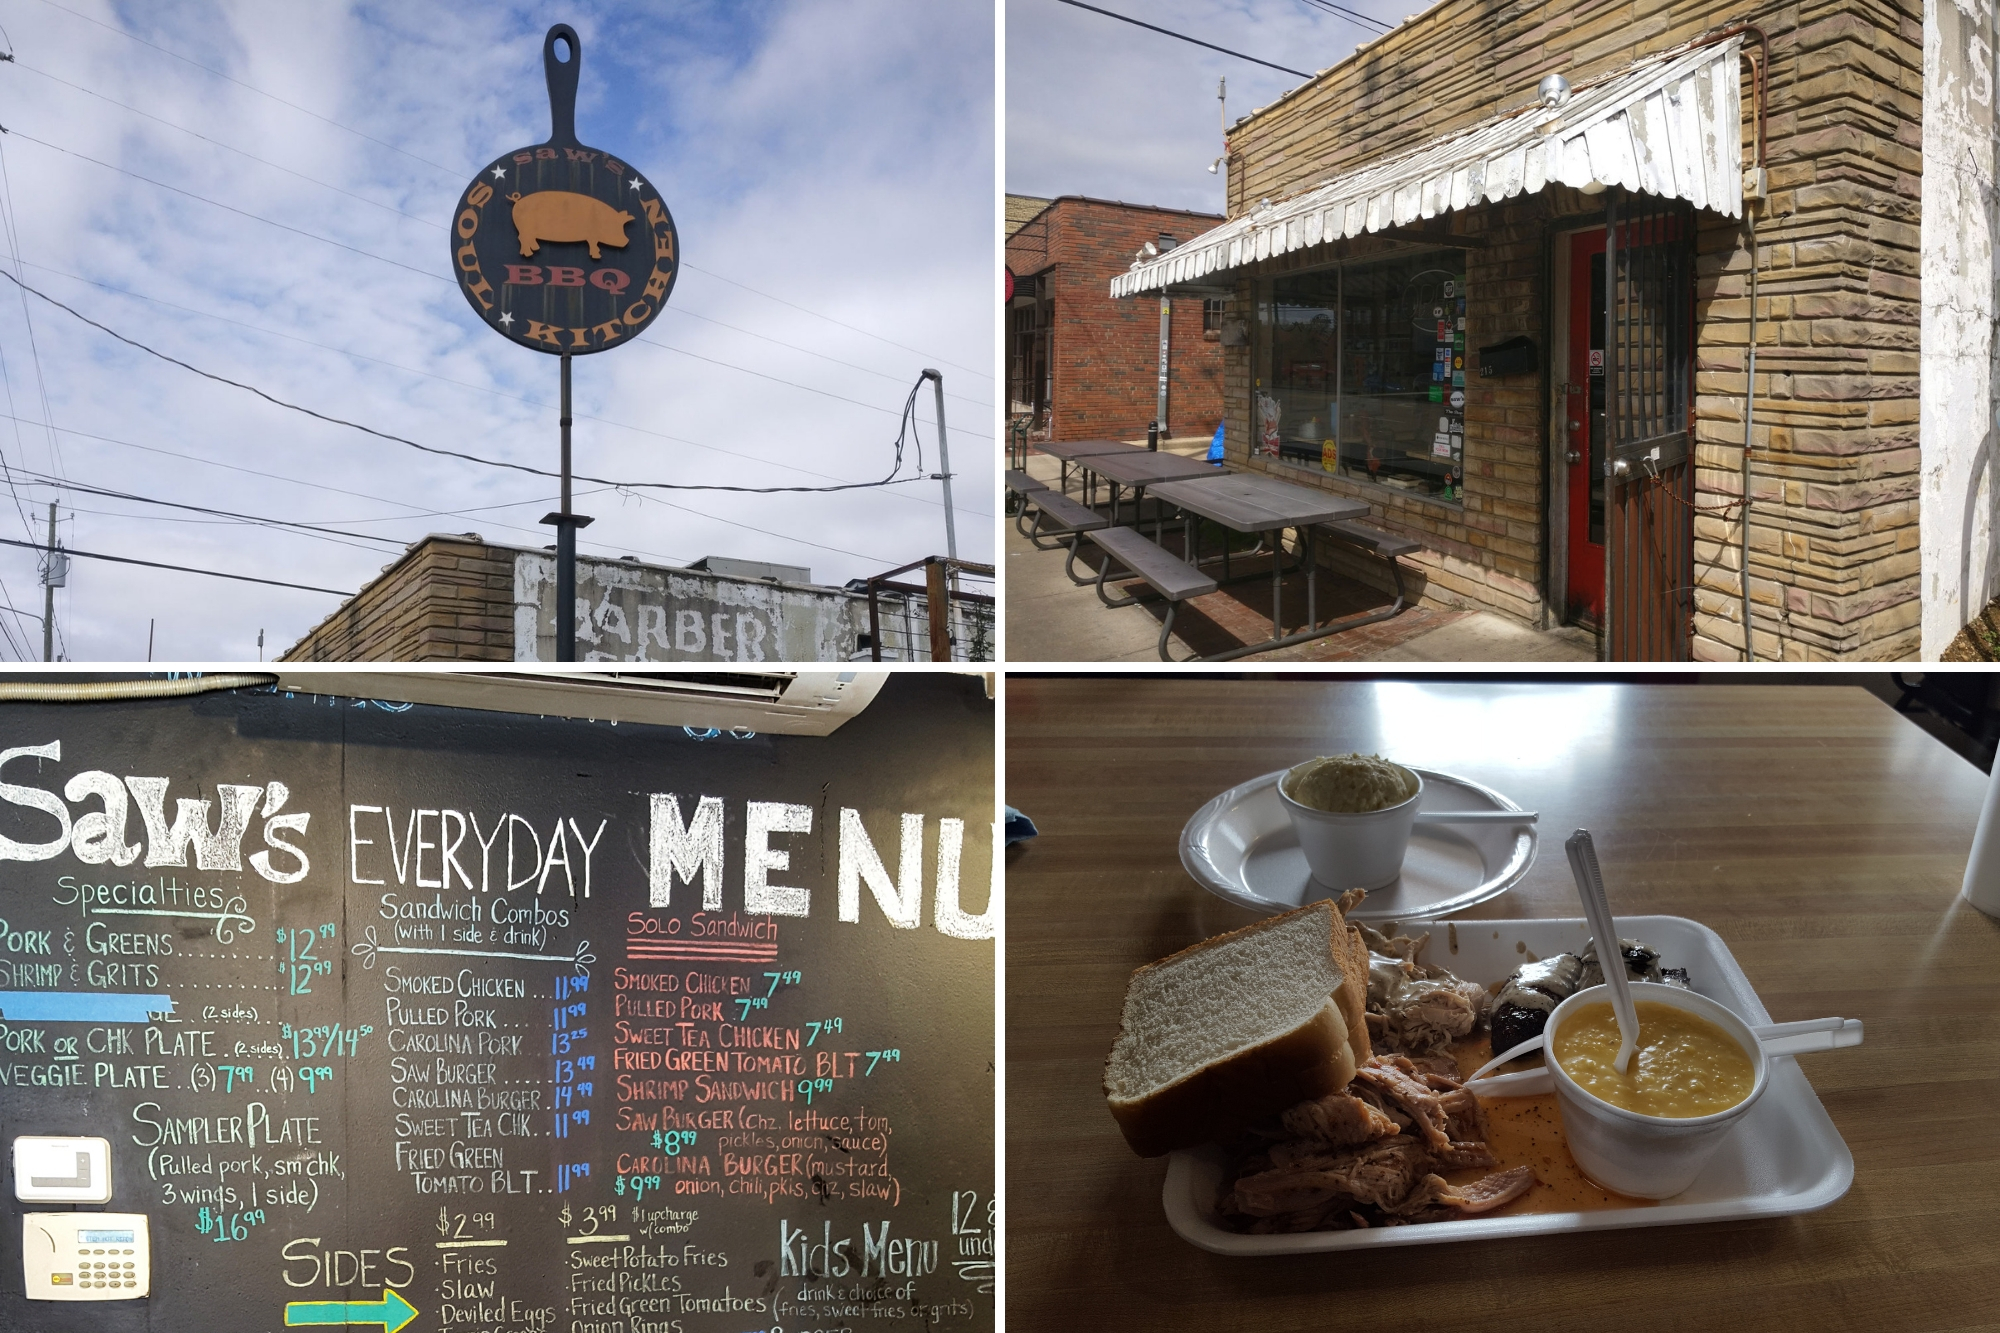 collage of saw's soul kitchen: photos of exterior, chalkboard menu, and sampler platter with chicken and pork